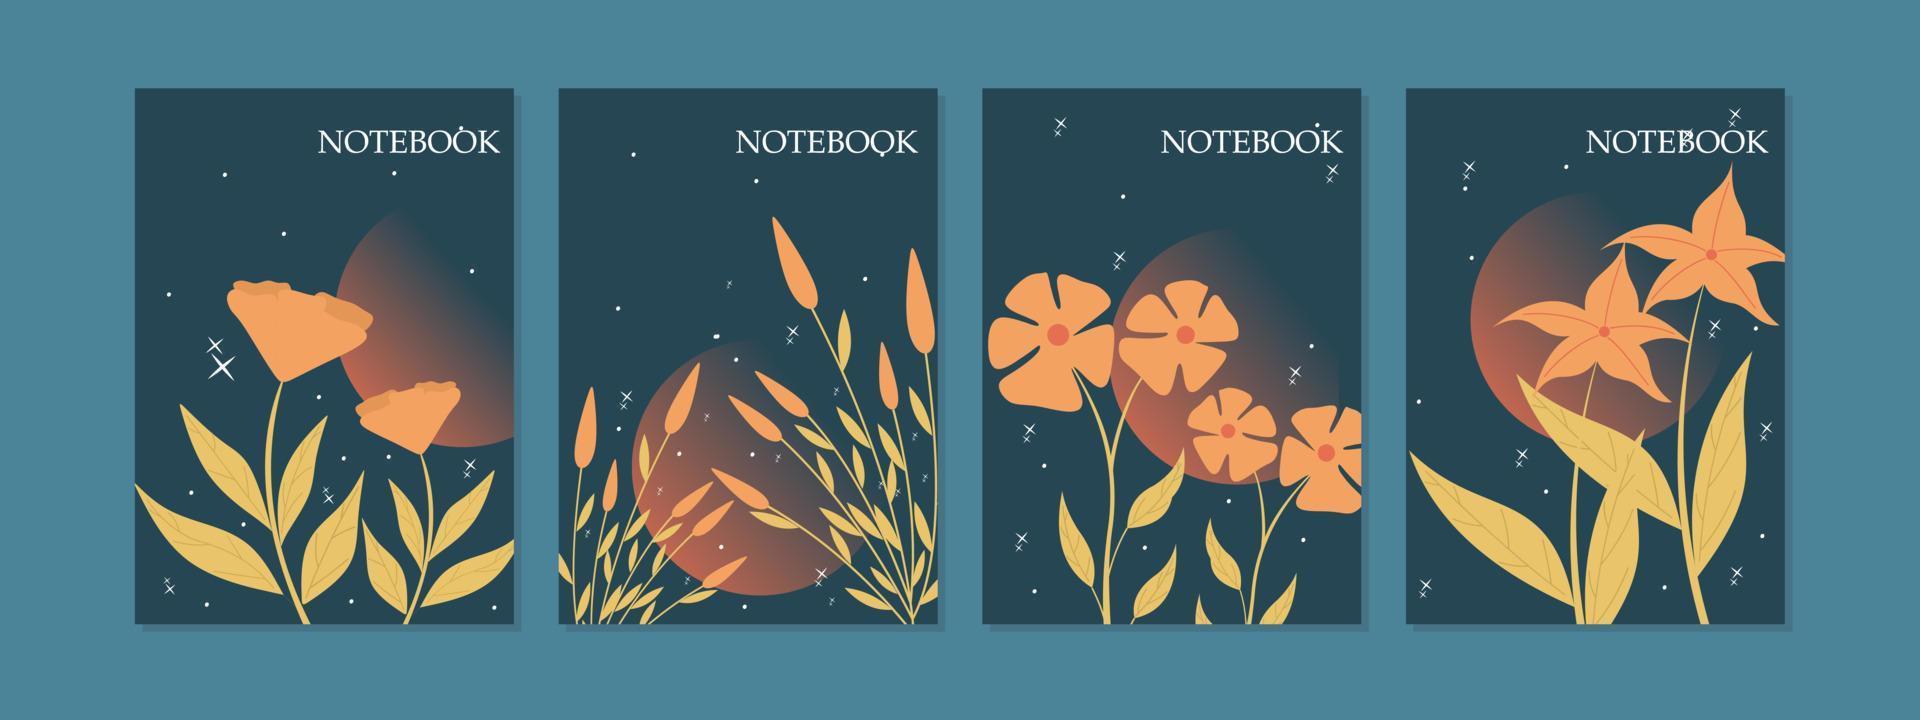 set of book cover designs with hand drawn floral decorations. night theme blue color background. size A4 For notebooks, planners, brochures, books, catalogs vector